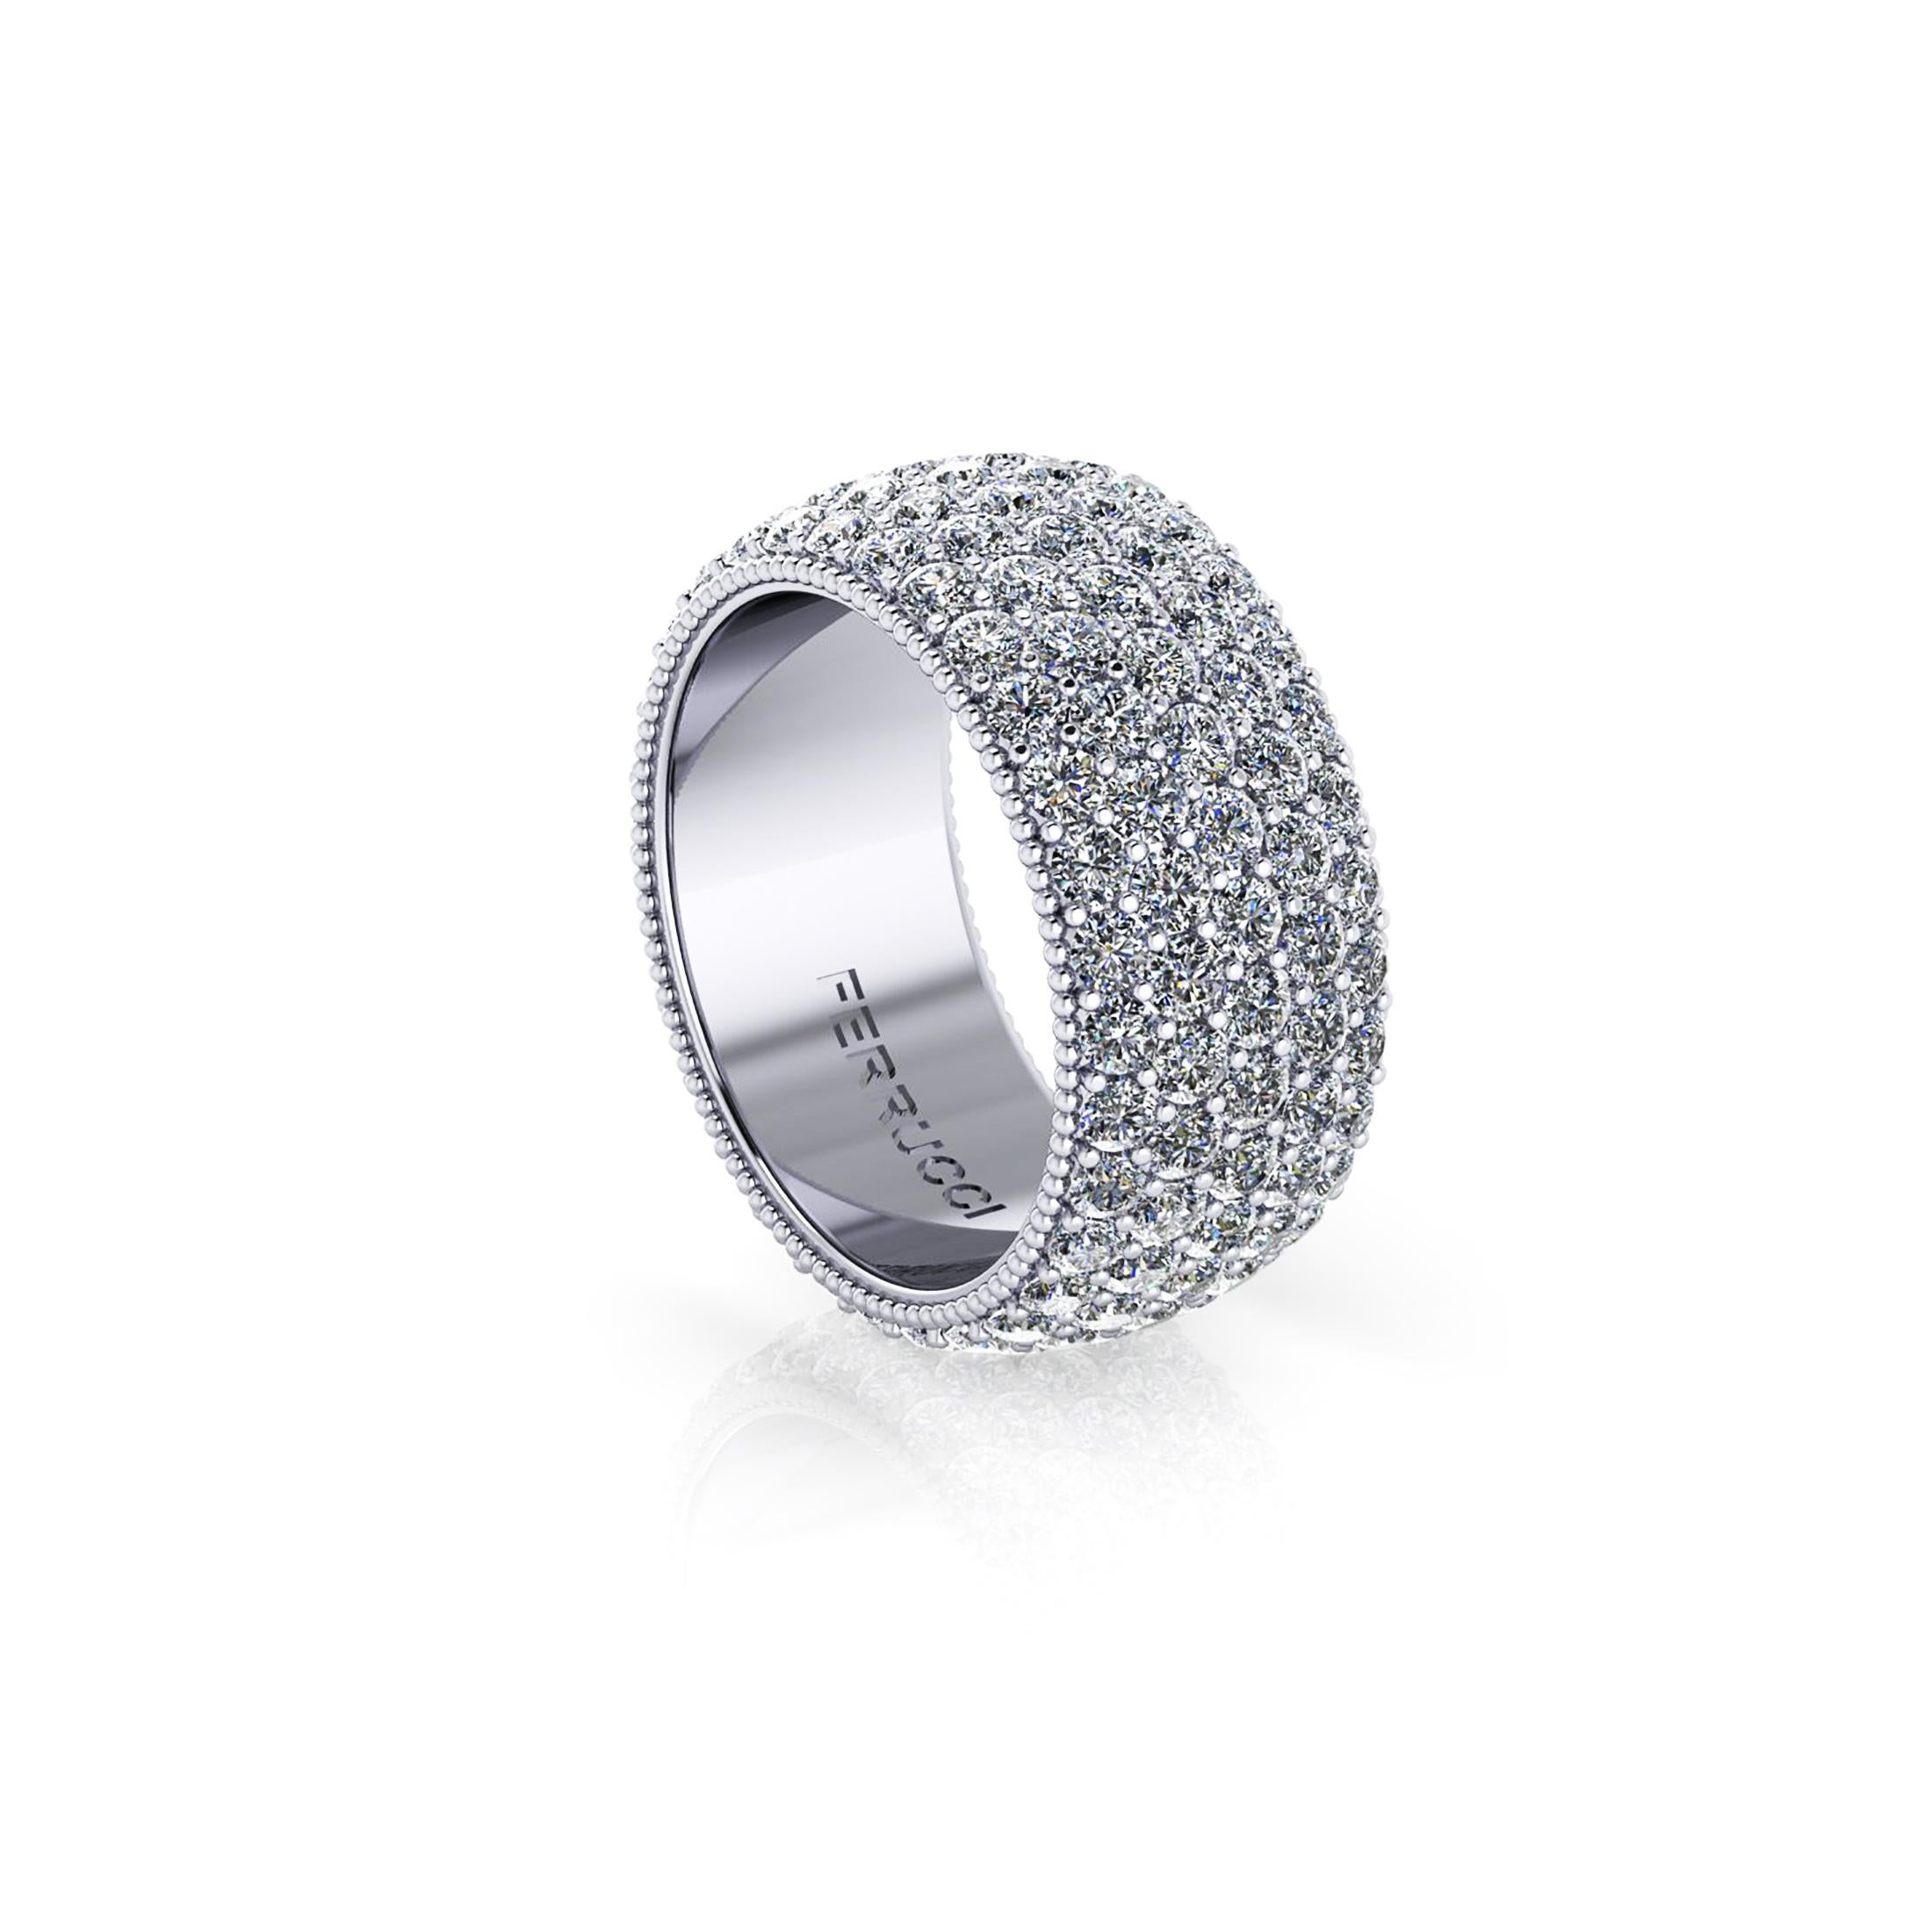 FERRUCCI Wide diamond pave' ring, with a slightly dome feeling, a wrap of sparkling white diamonds, G color clarity, SI1 +++ for an approximate total carat weight of 4.60 carats, hand made in New York City with the best Italian craftsmanship,